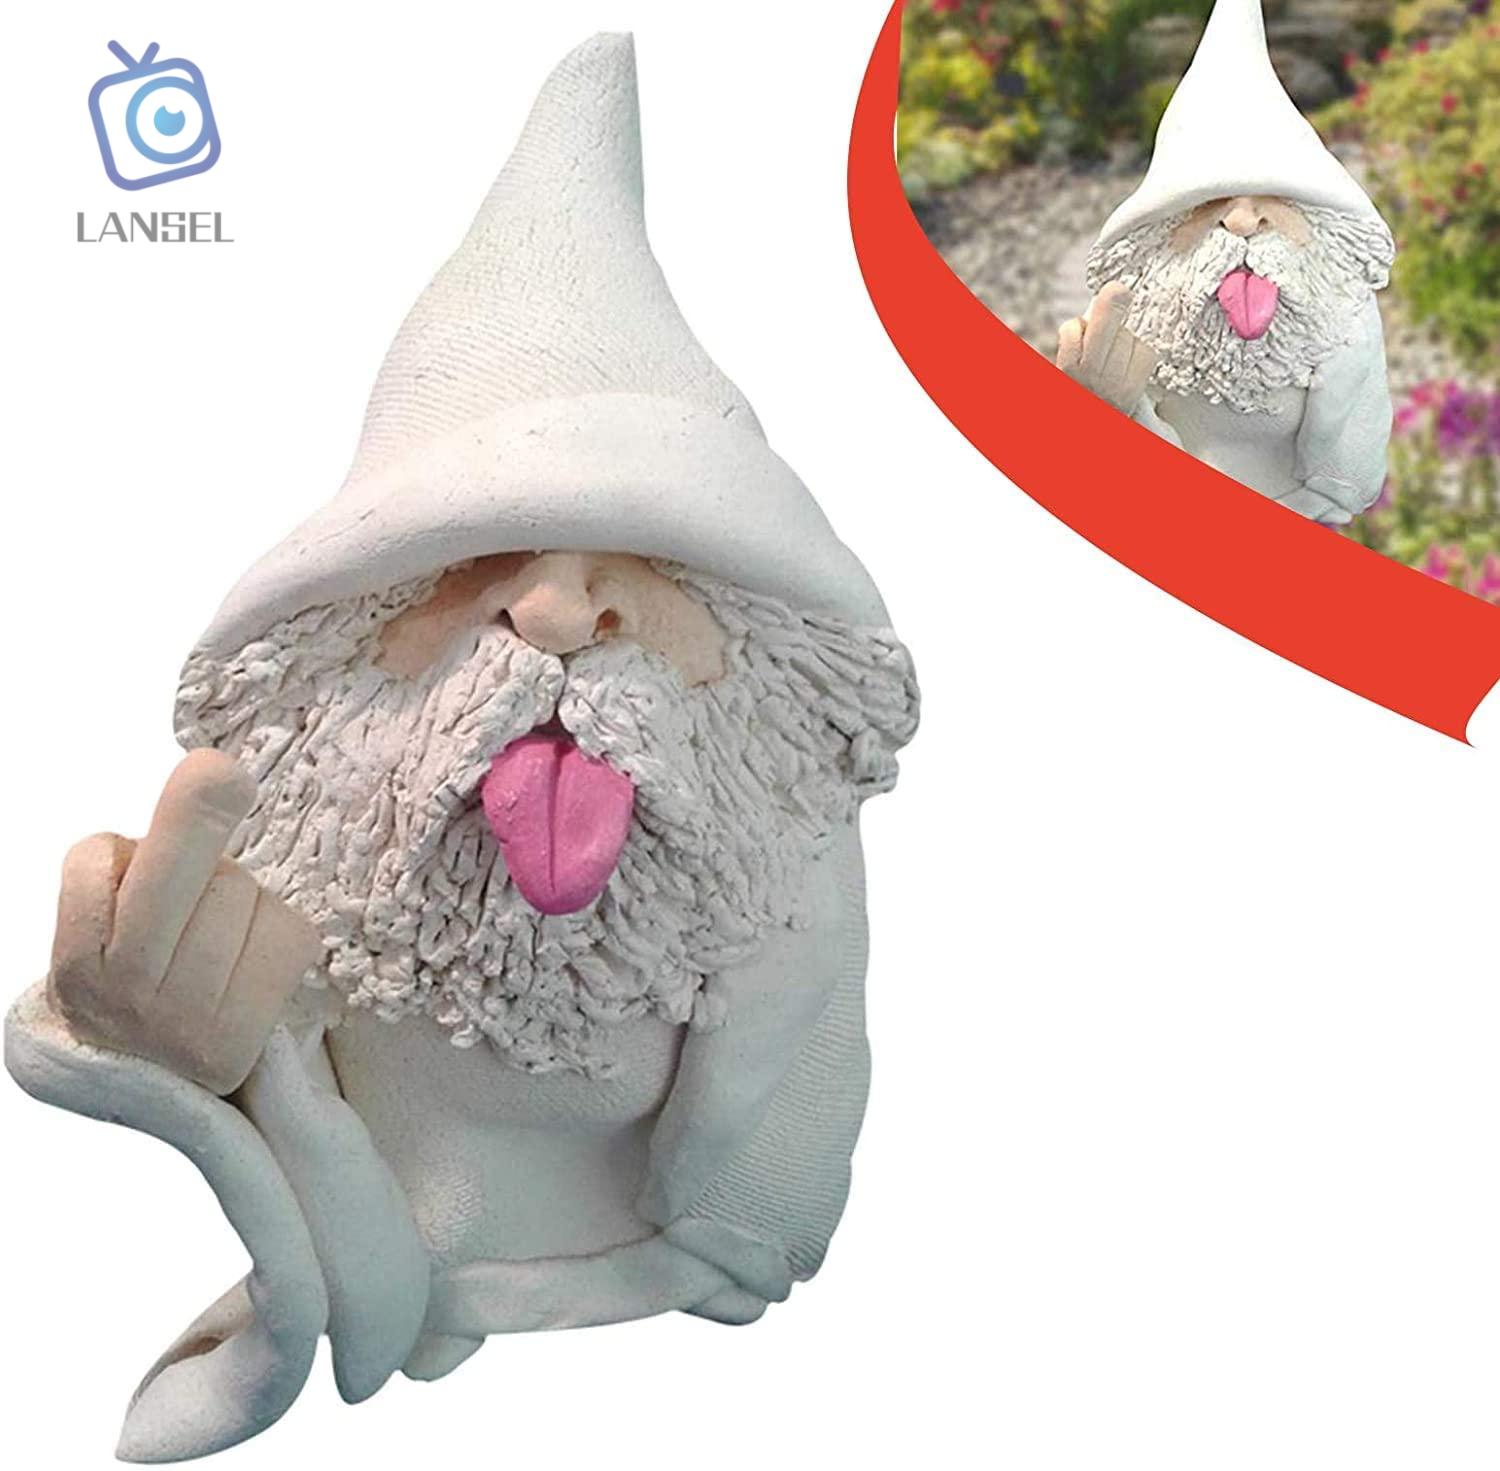 ❤LANSEL❤ Gift Dwarf Figurines Decoration Crafts Micro Landscape Garden Gnomes Funny Elf Collectible Home Decor Ornaments Indoor Outdoor Big Tongue Elves Funny Statue